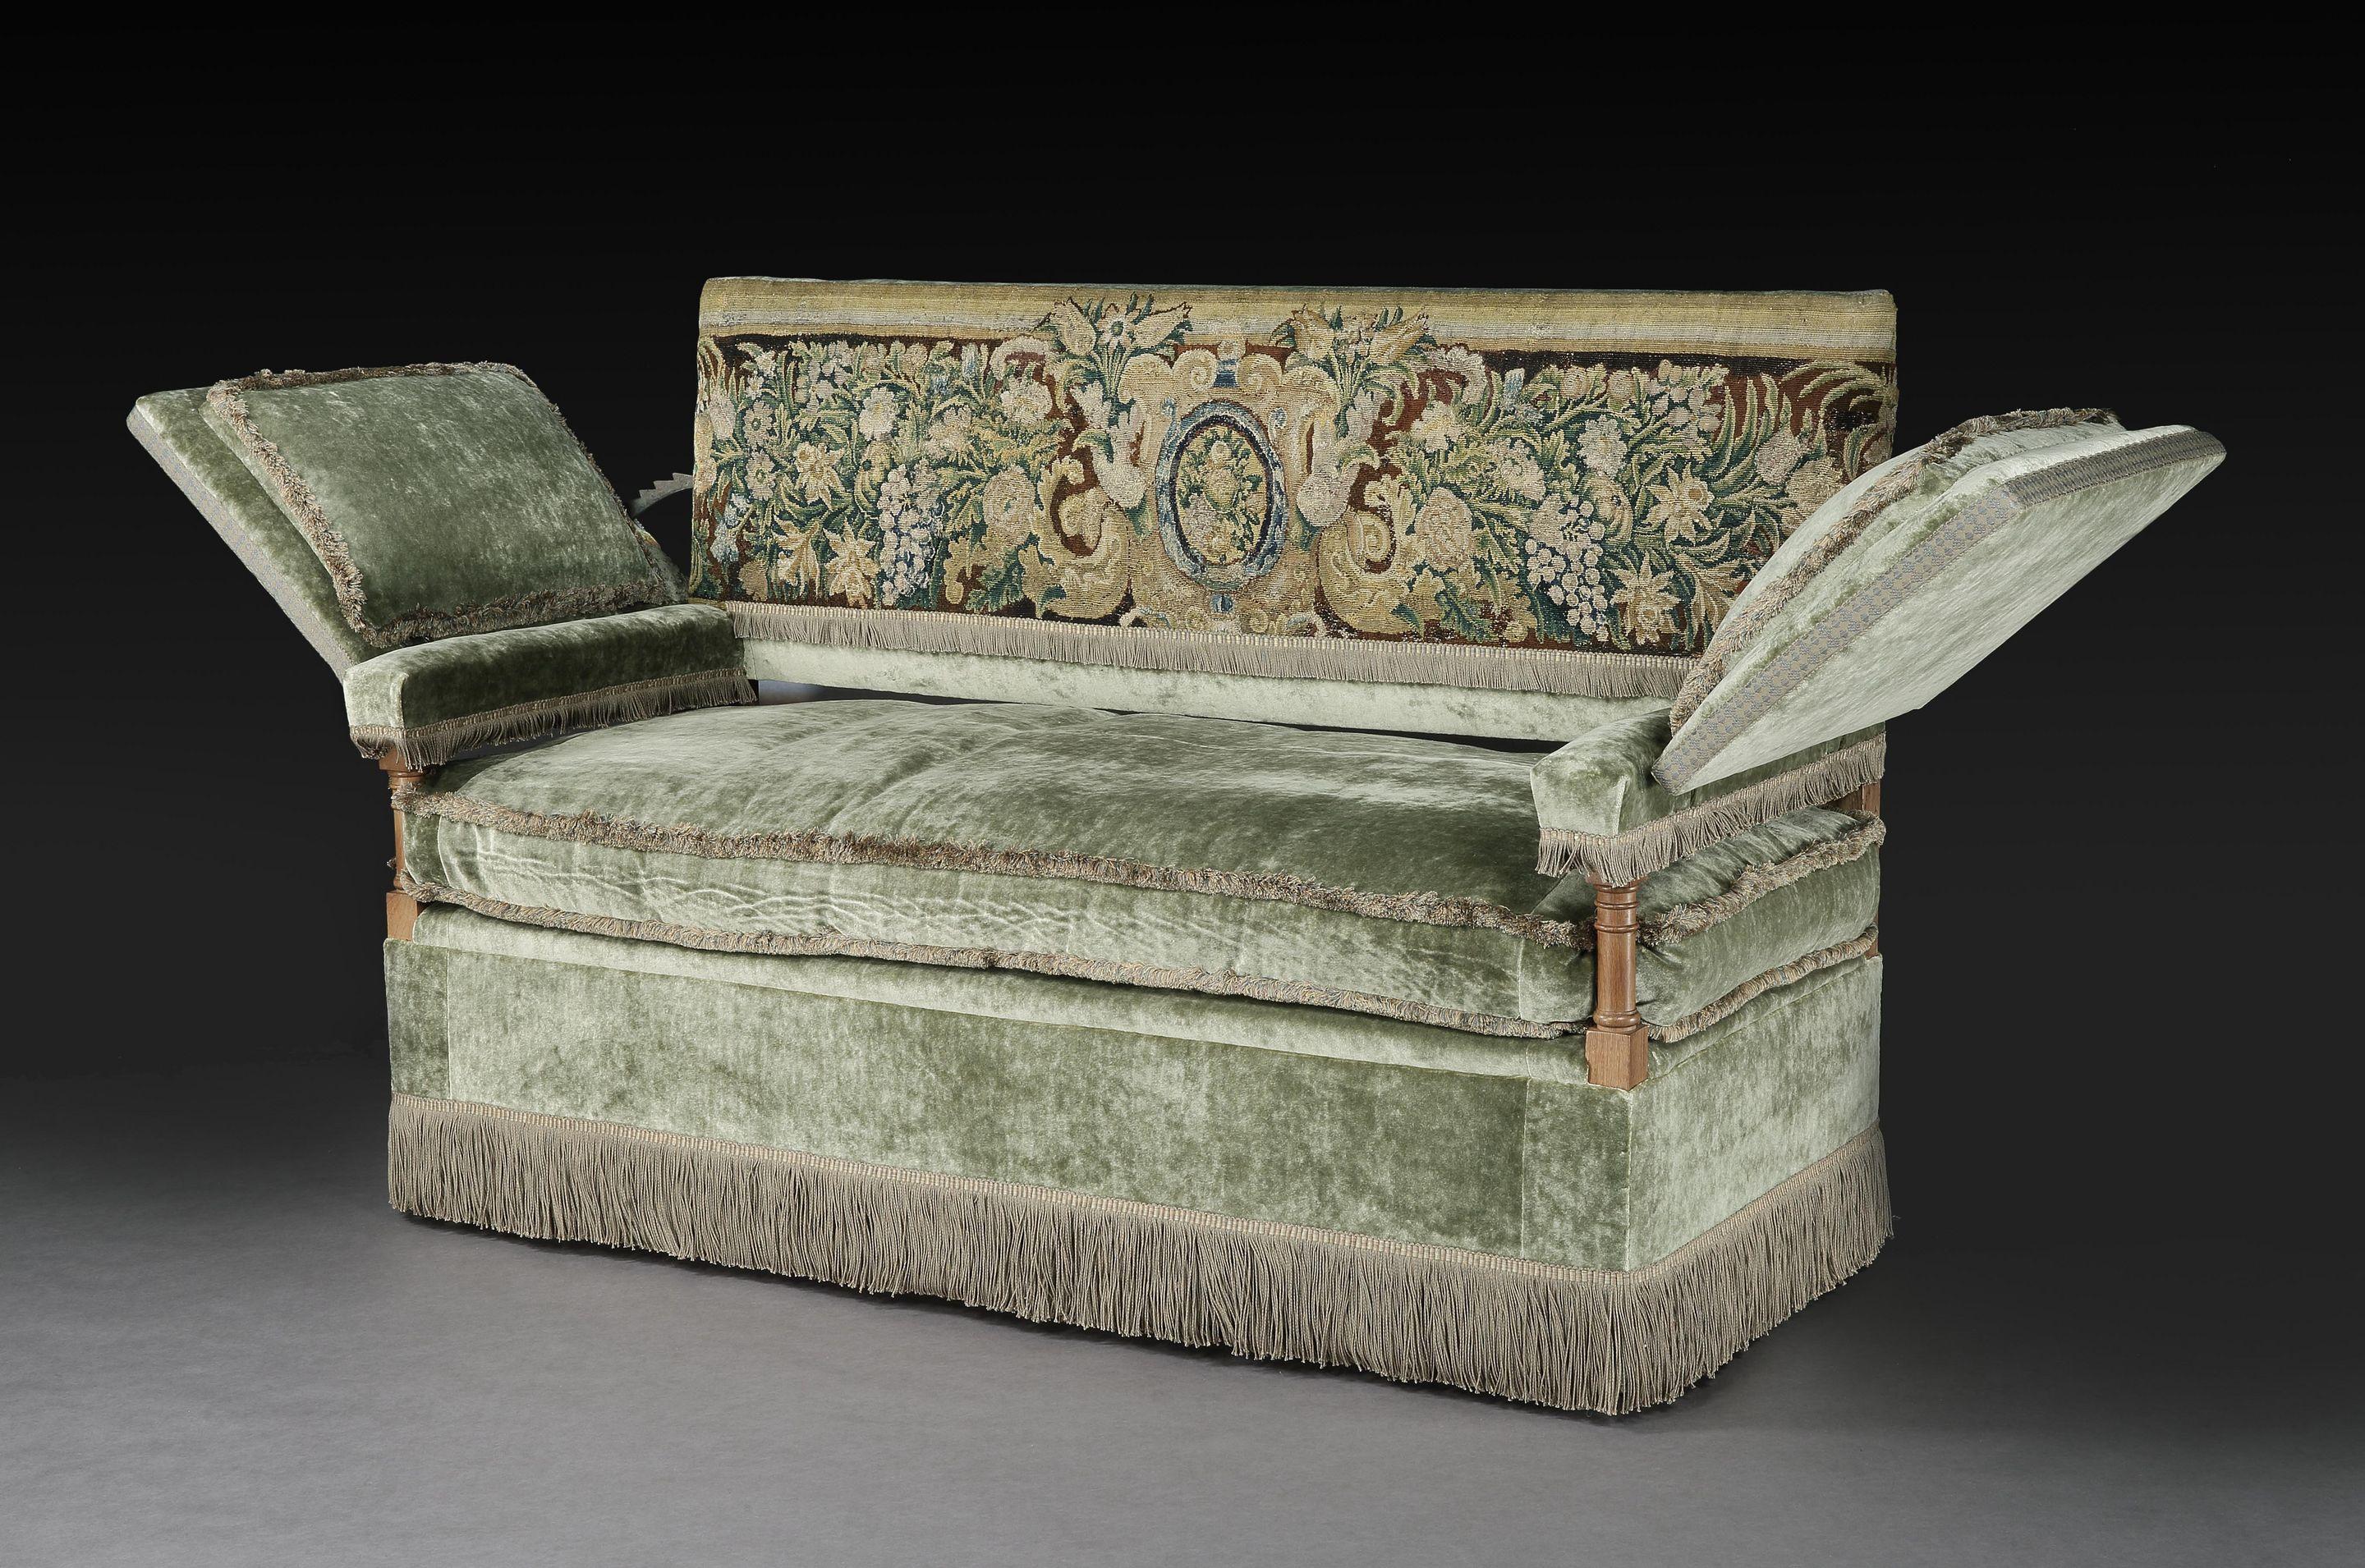 Charles II Table Knole Settee, Cowdray Park, Angleterre, Lengyon & Co, velours olive, tapisserie en vente